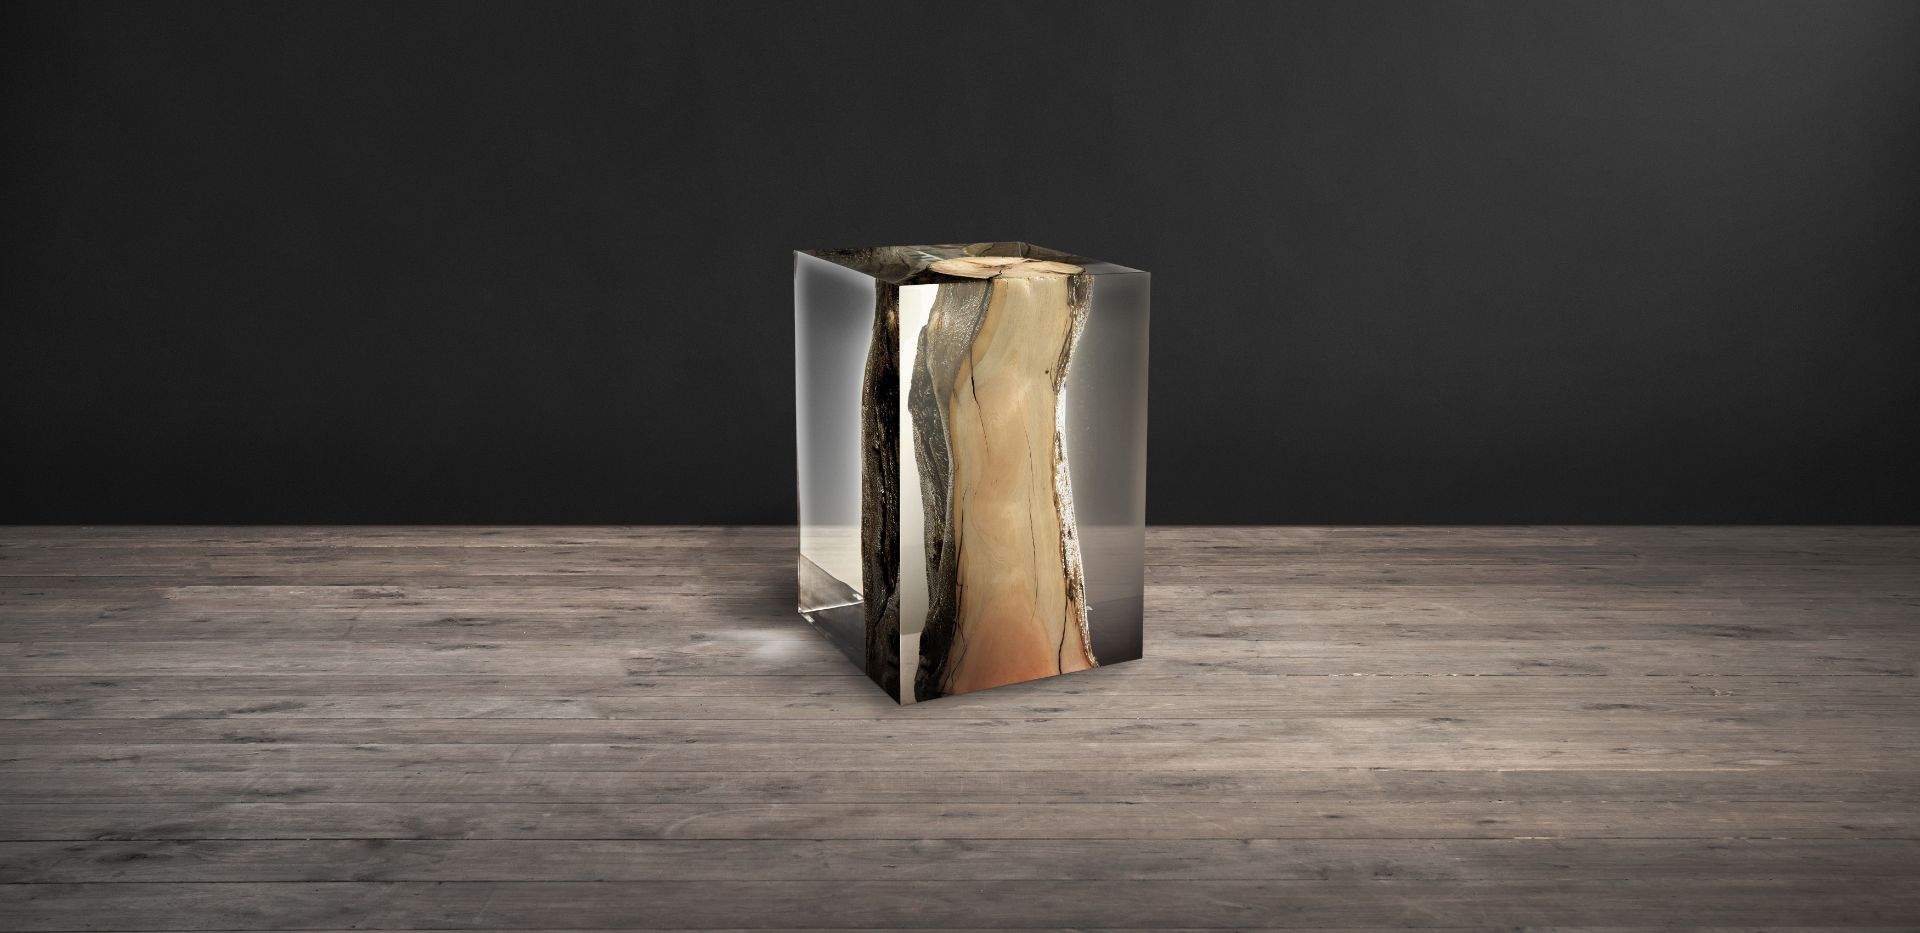 Xylem Side Table – Acrylic Burnt Wood. Memories Of Lazy Days On The Beach And Storytelling Around - Image 2 of 2